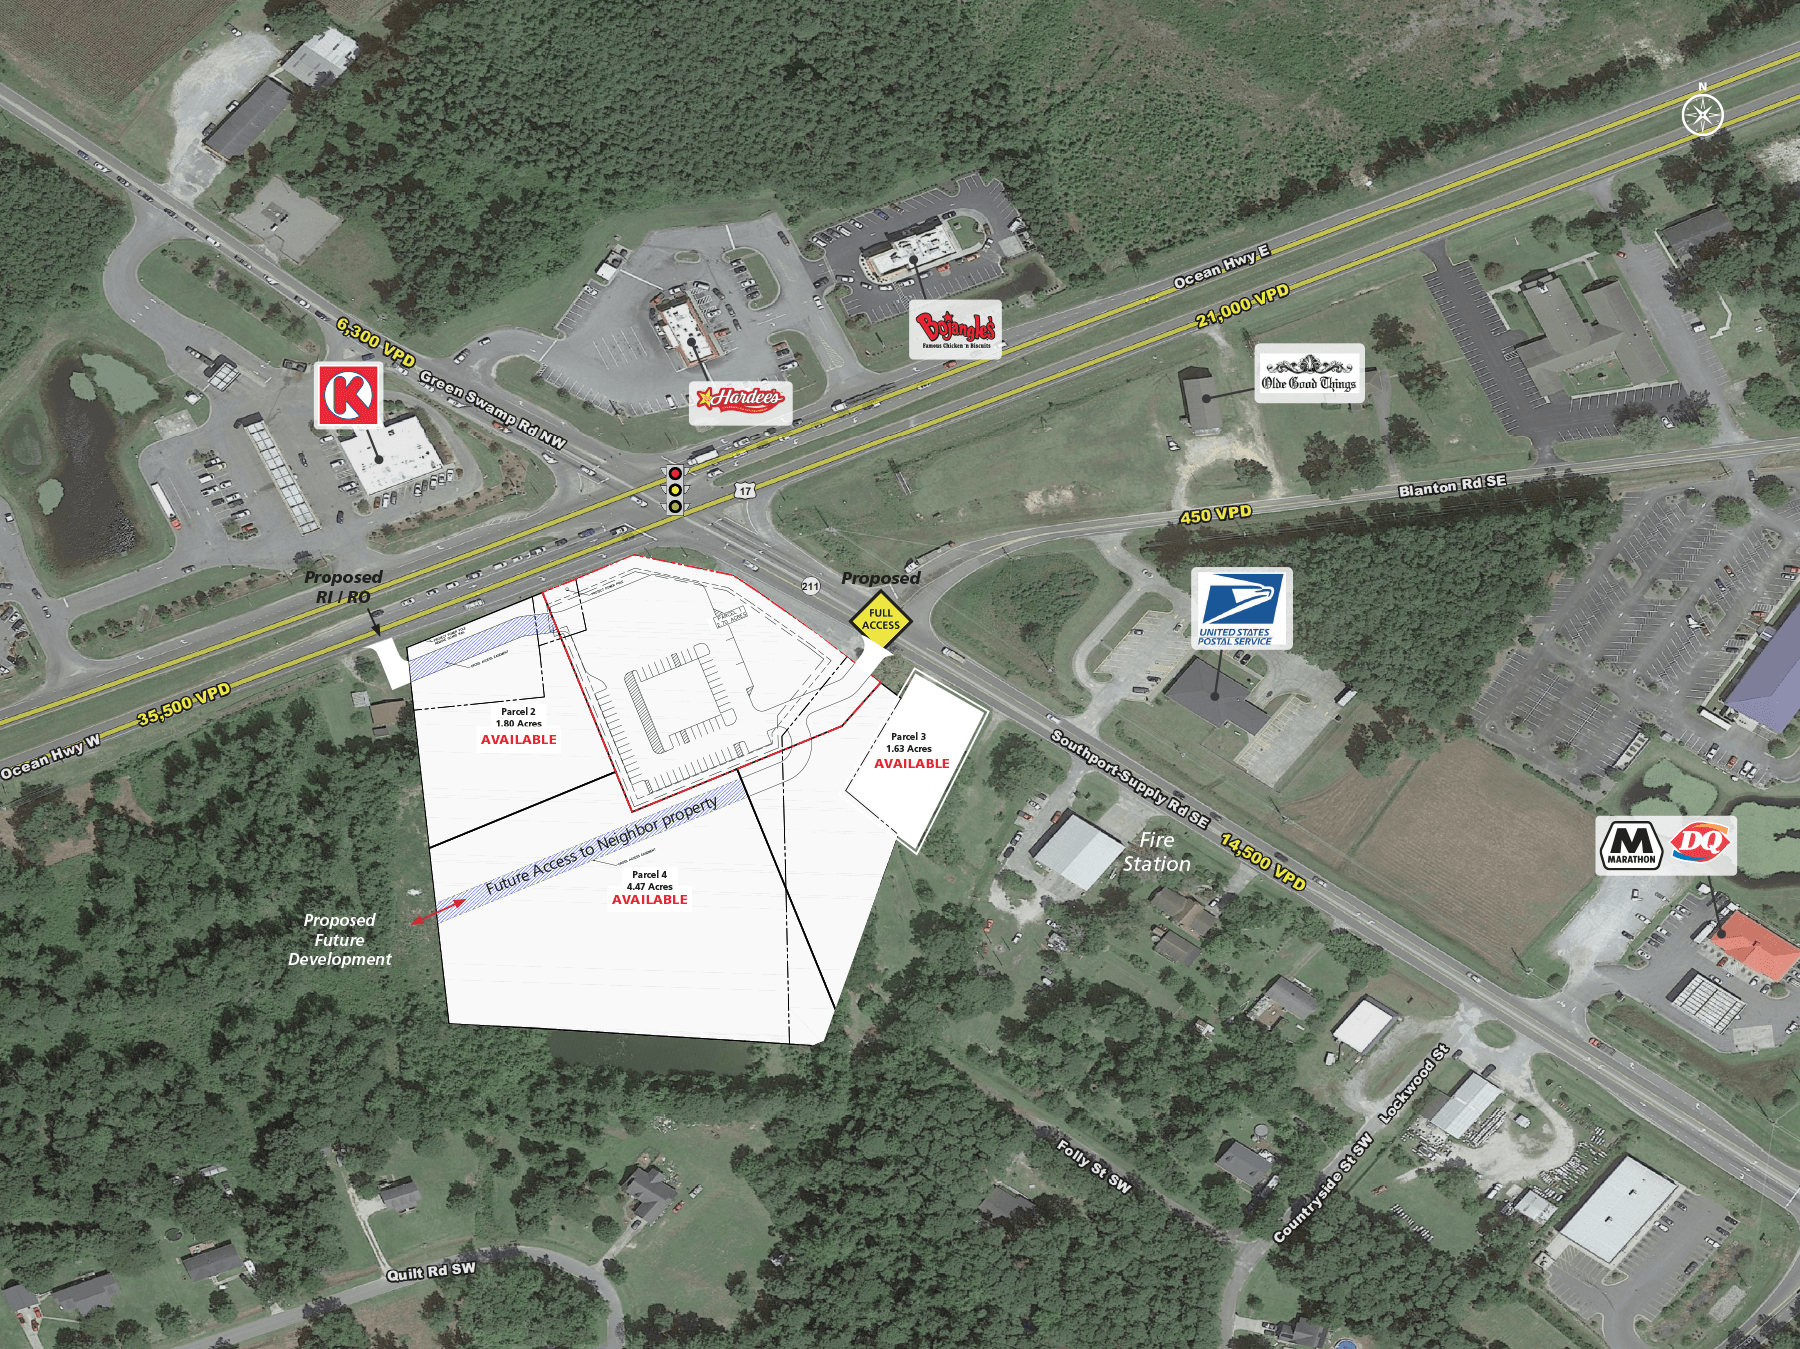 SUPPLY, NC PAD SITE – ADJACENT TO INDUSTRY LEADING CONVENIENT STORE